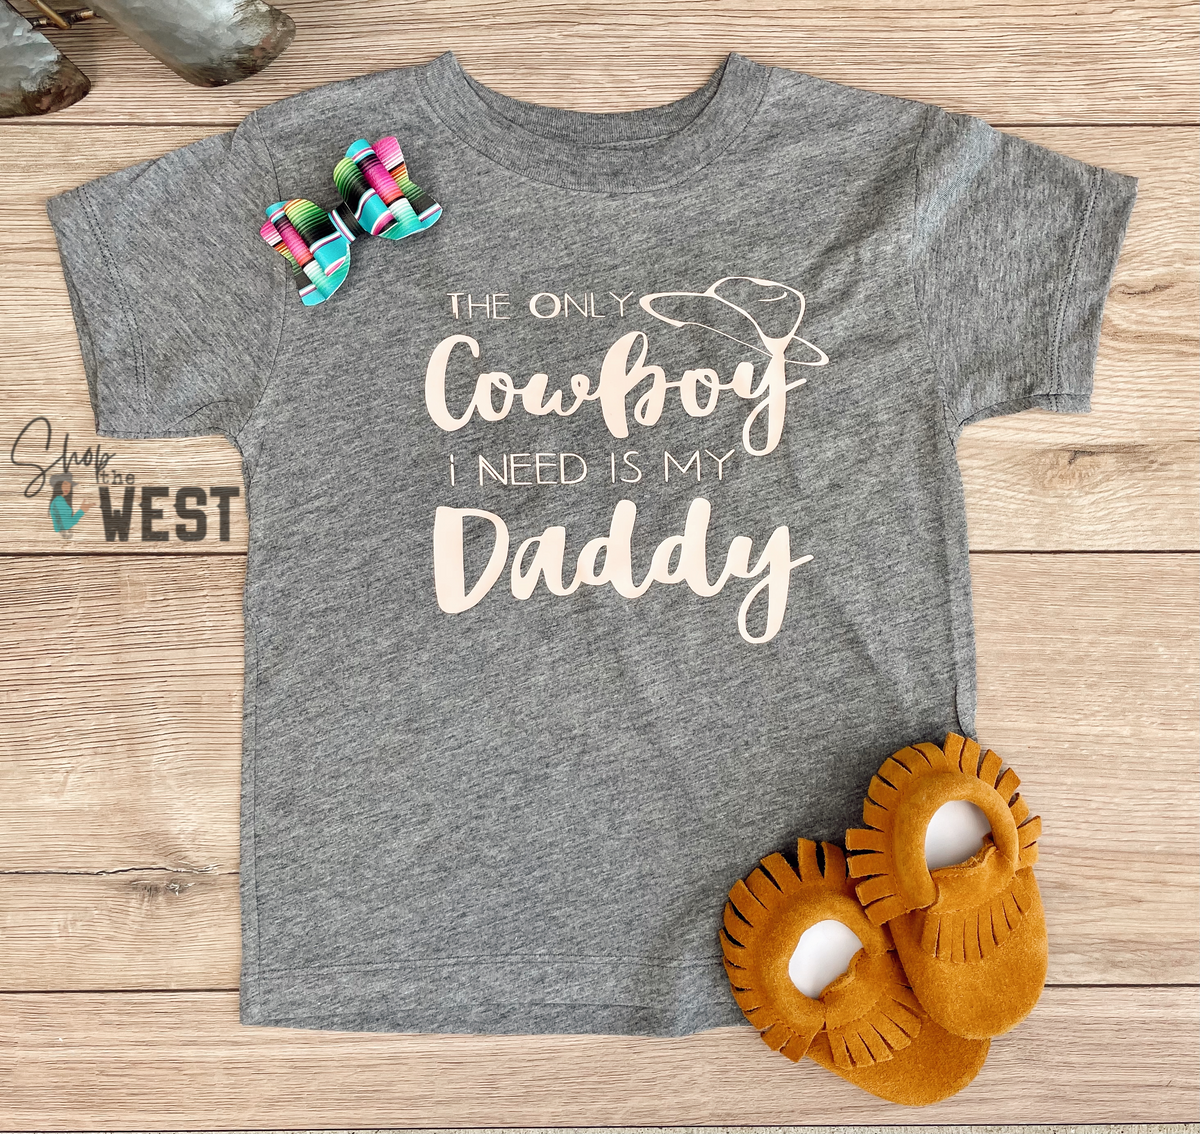 The only Cowboy I need is my Daddy